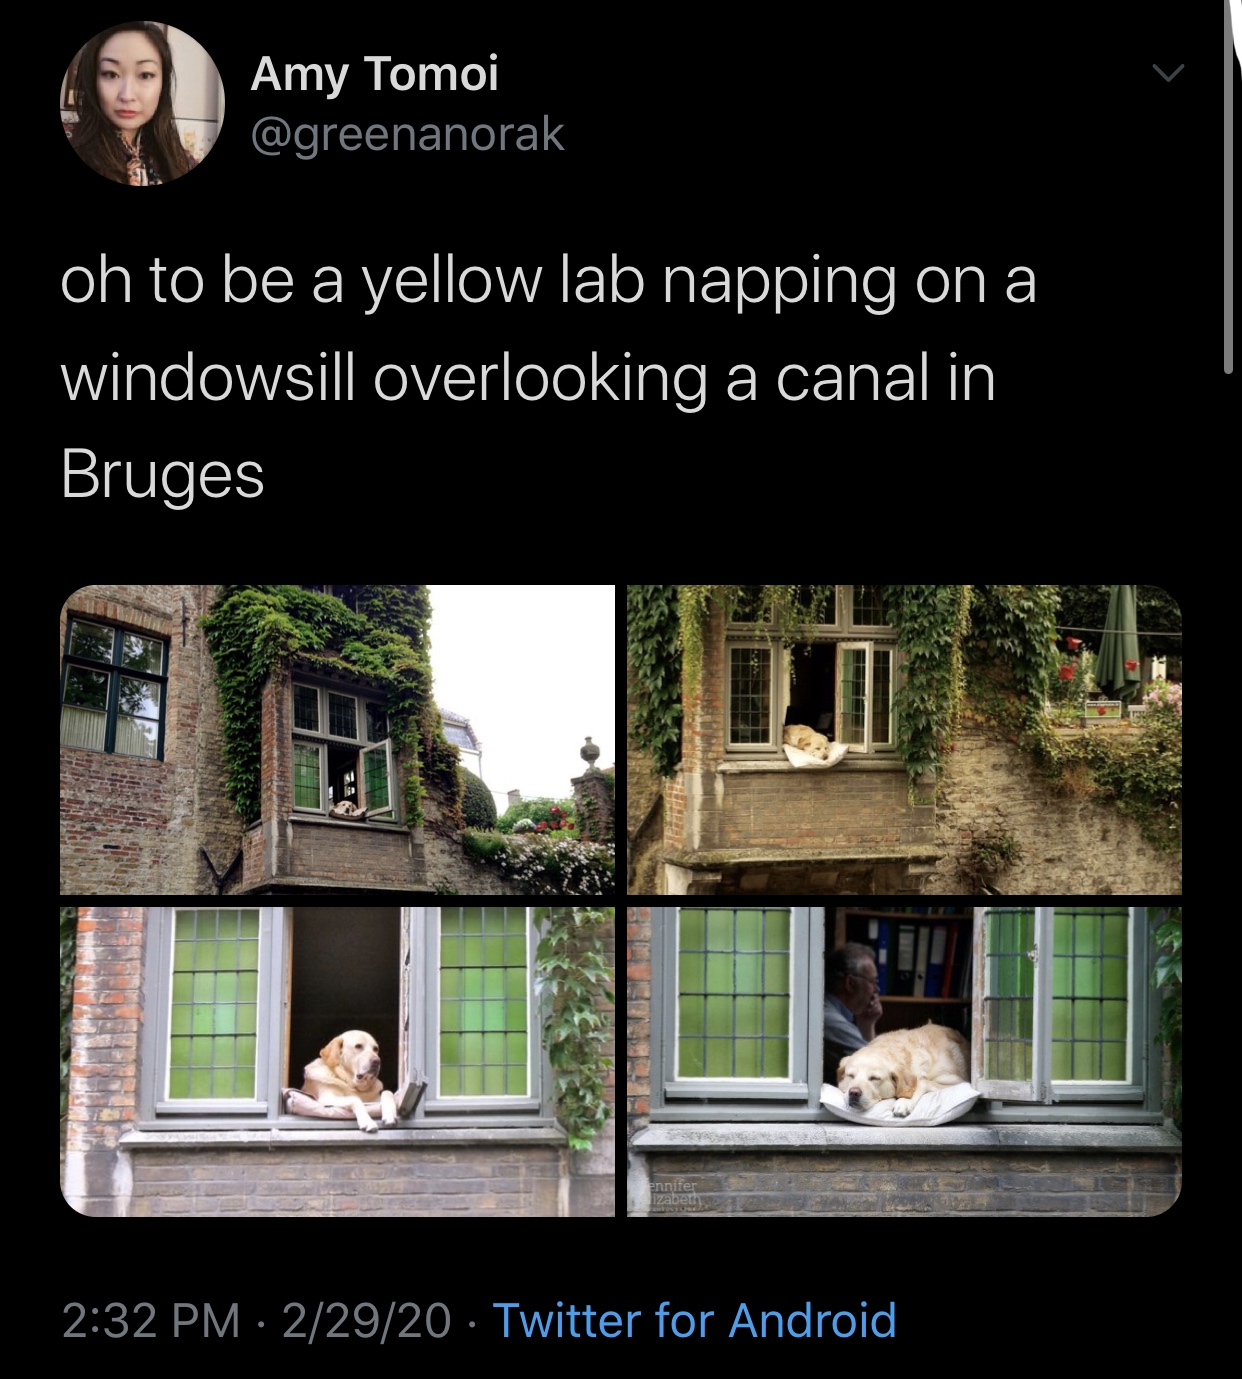 architecture - Amy Tomoi oh to be a yellow lab napping on a windowsill overlooking a canal in Bruges 22920 Twitter for Android